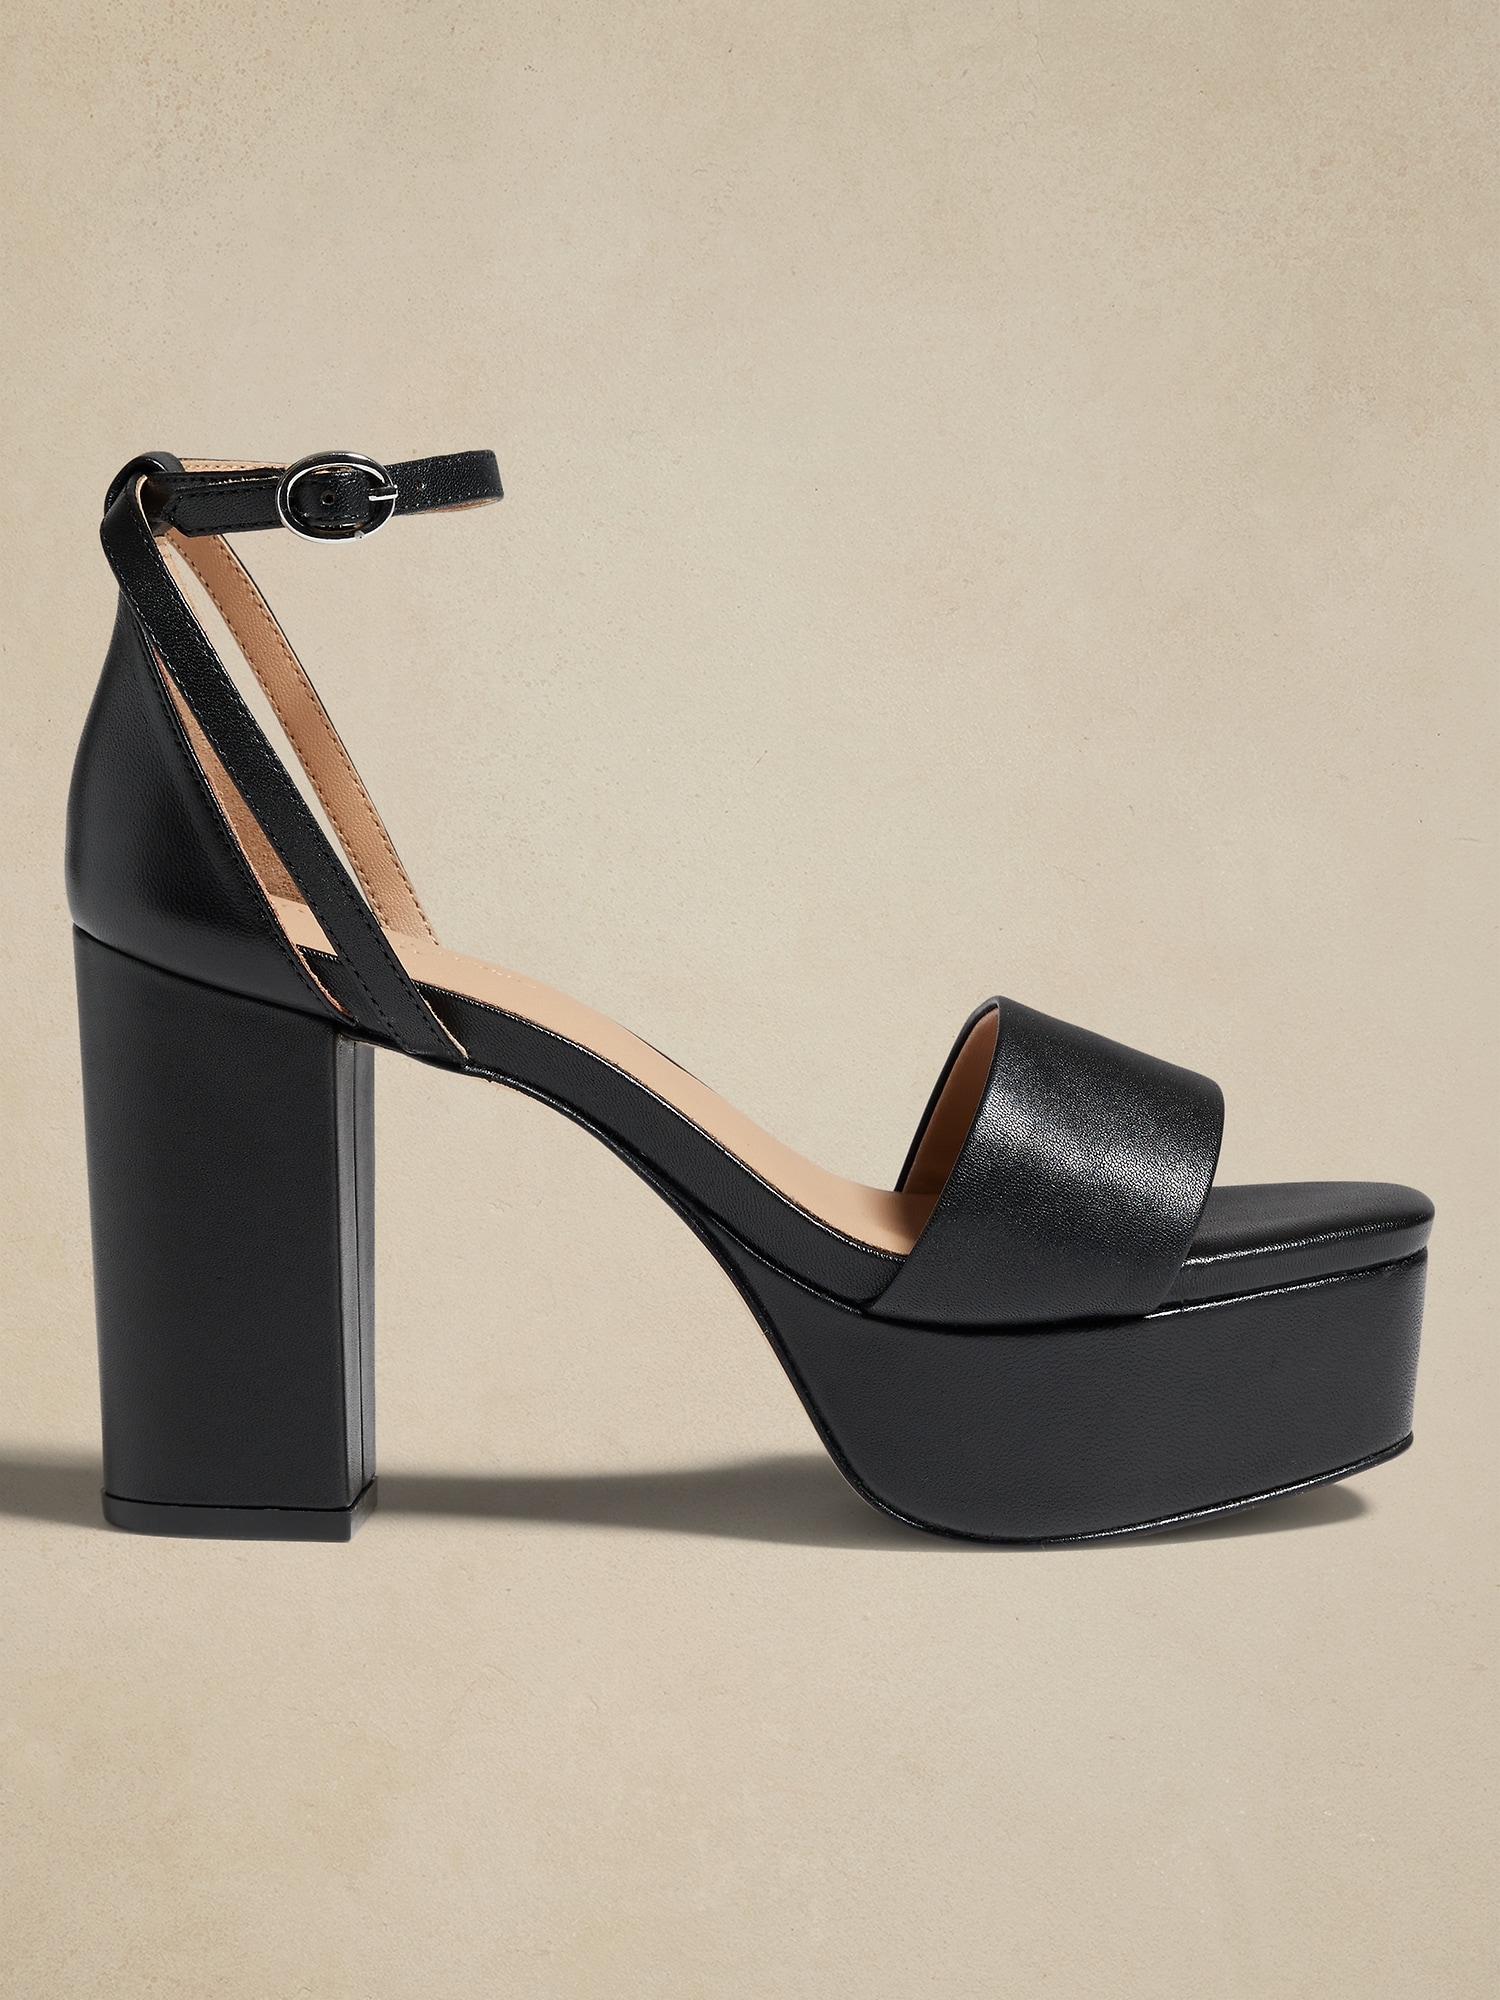 Truffle Collection Wide Fit double platform heeled shoes in black satin |  ASOS-hkpdtq2012.edu.vn